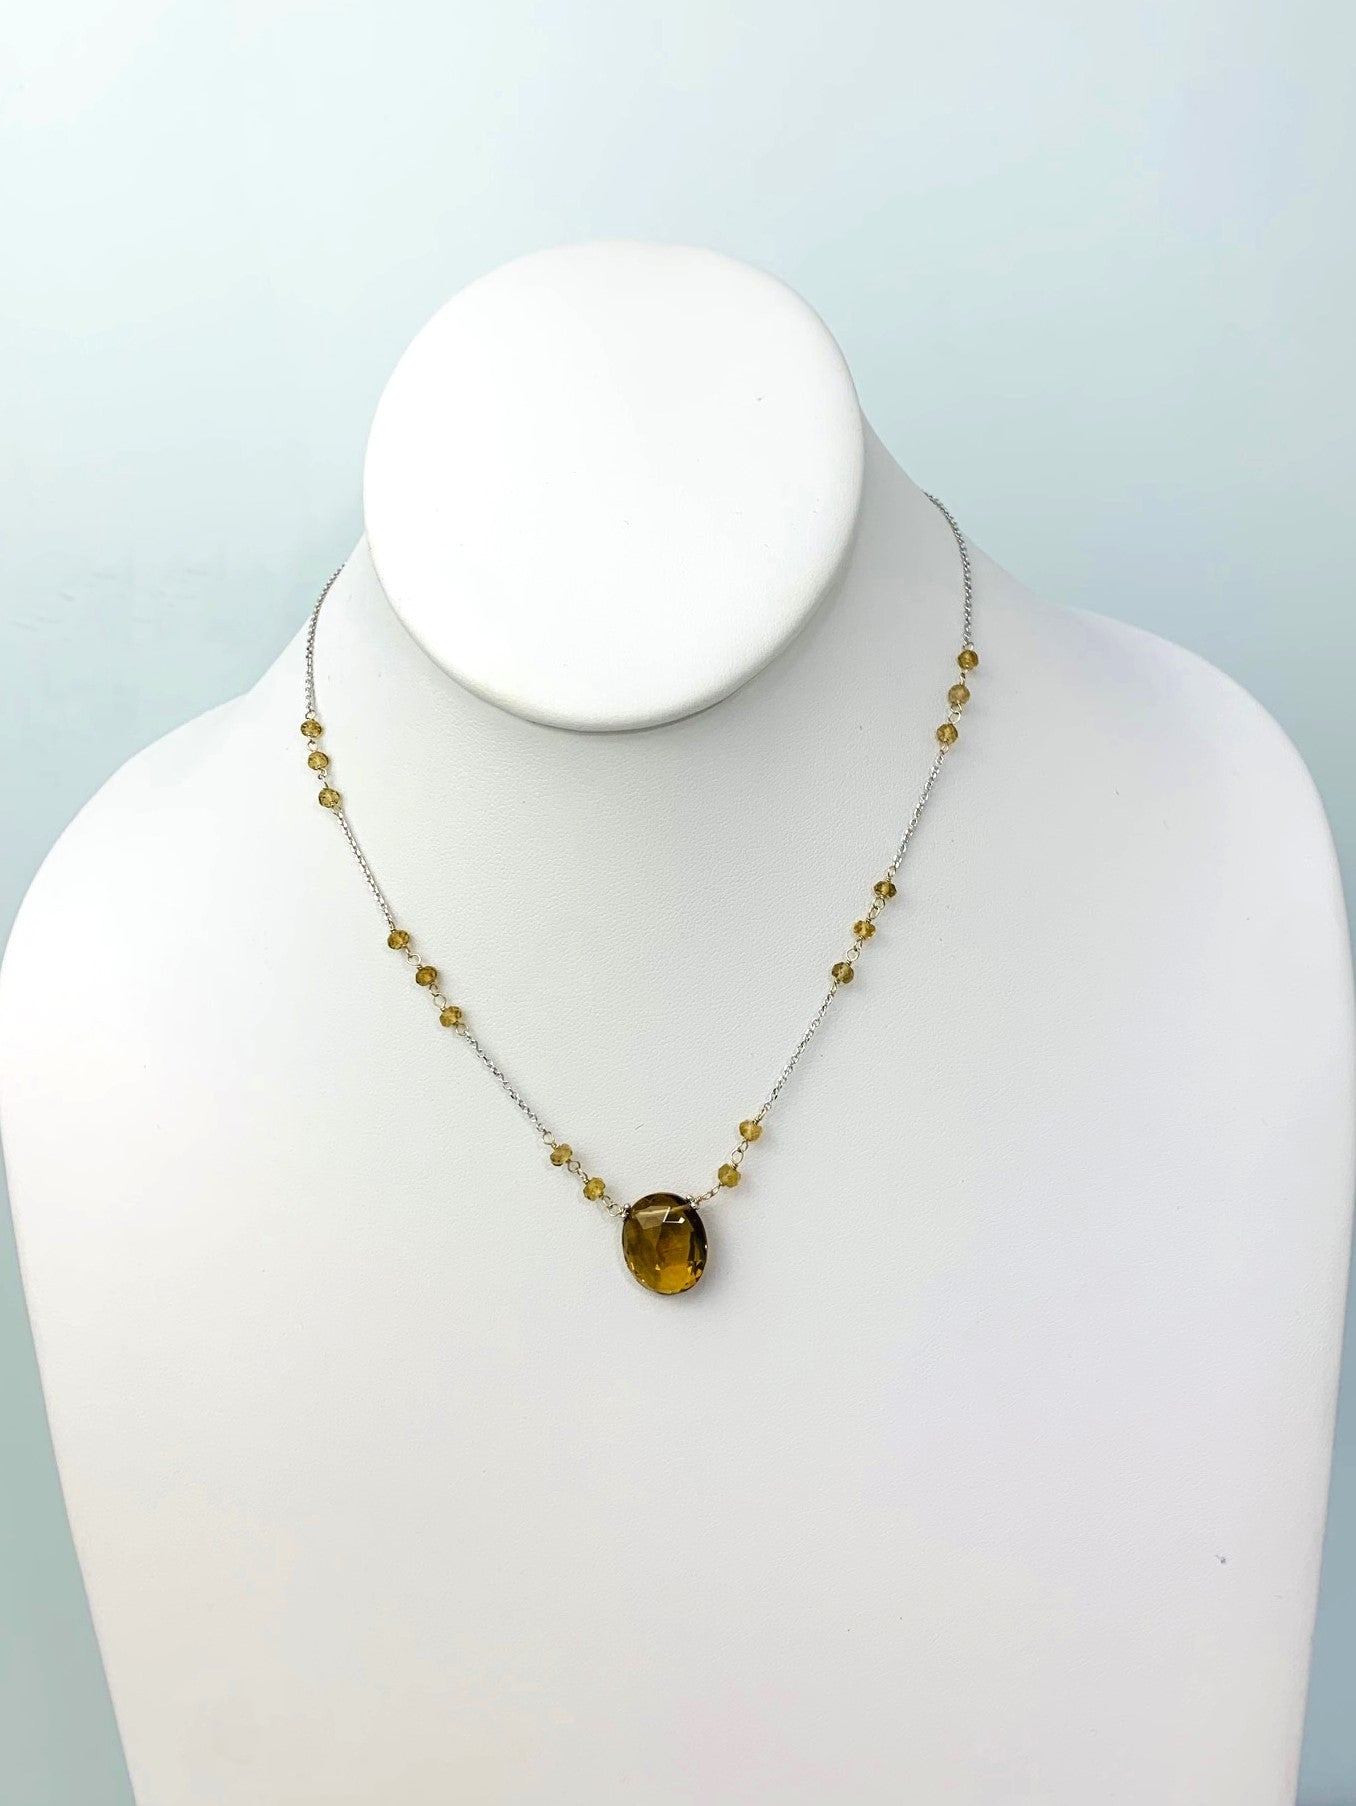 Clearance Sale! - 16-17" Honey Quartz Station Necklace With Oval Center in 14KW - NCK-380-TNCGM14W-HQ-17